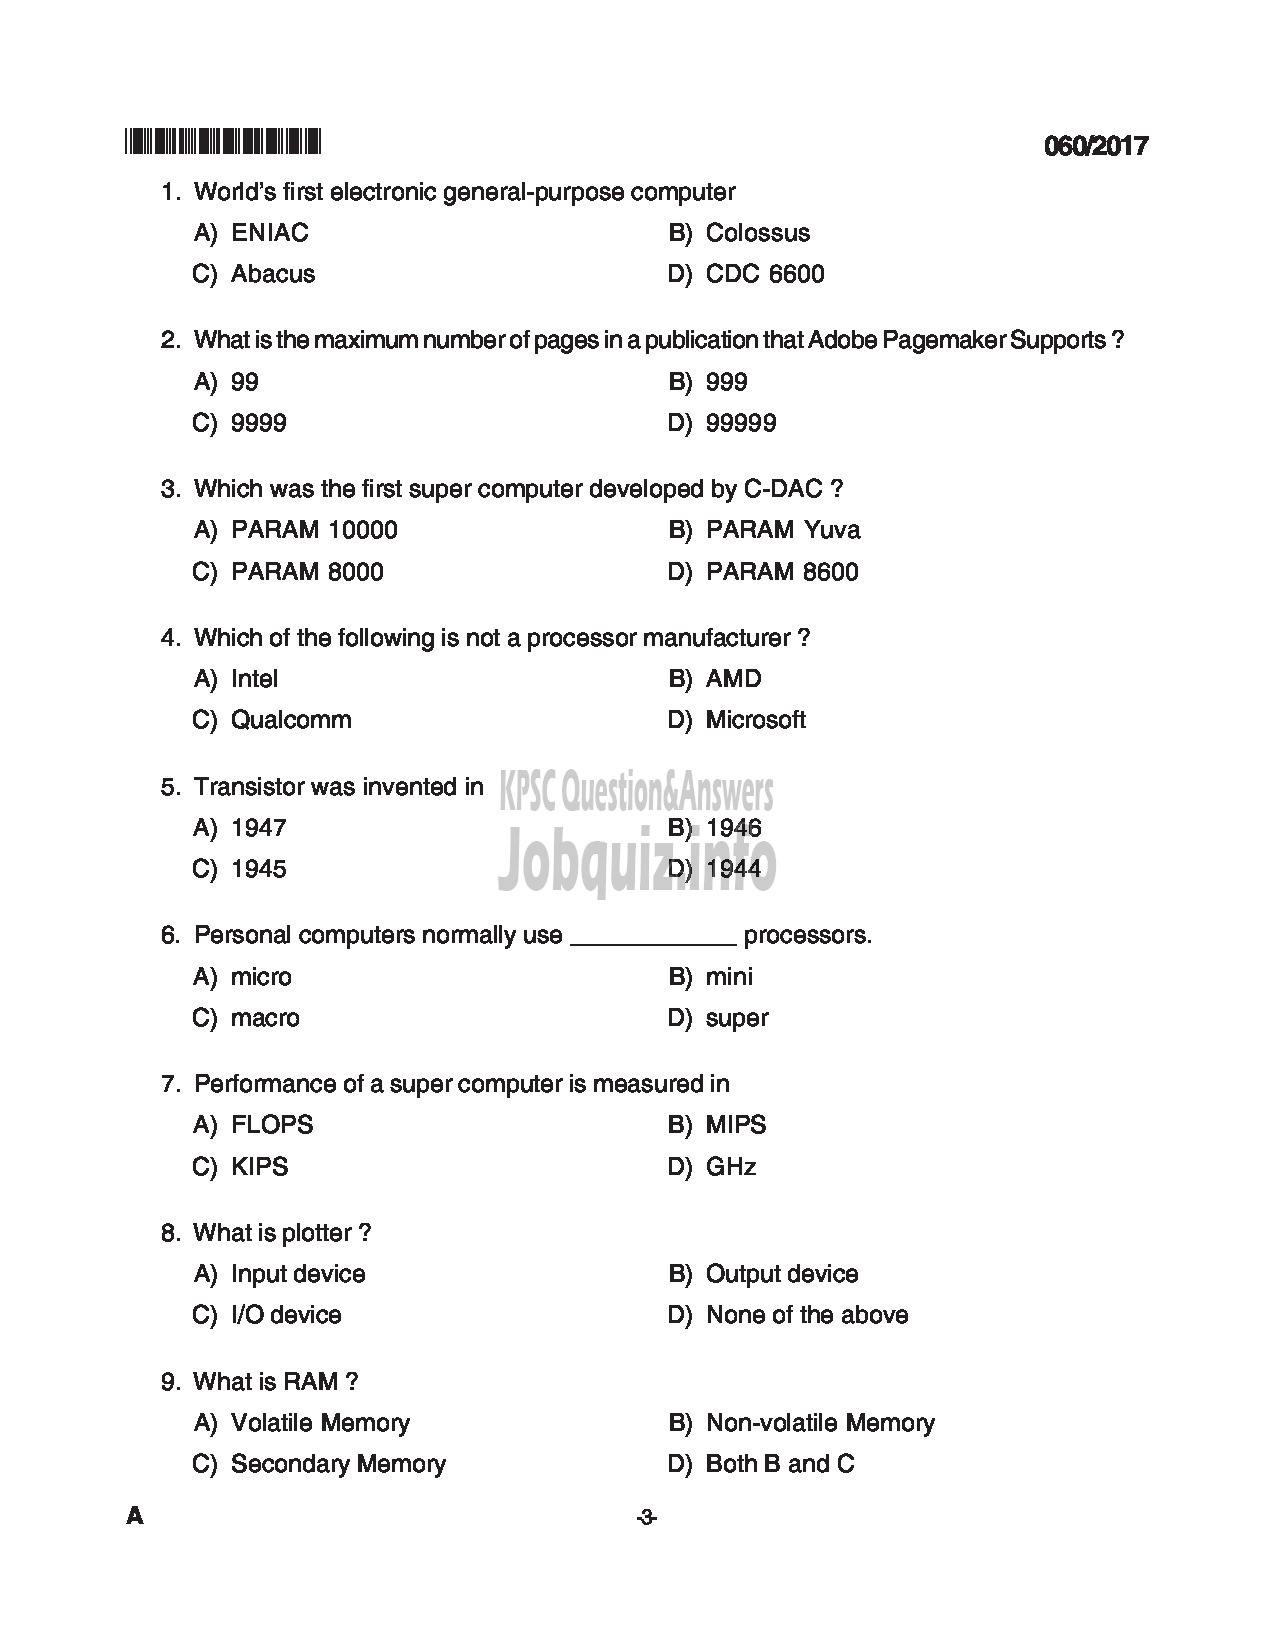 Kerala PSC Question Paper - TRADESMAN COMPUTER ENGINEERING TECHNICAL EDUCATION QUESTION PAPER-3